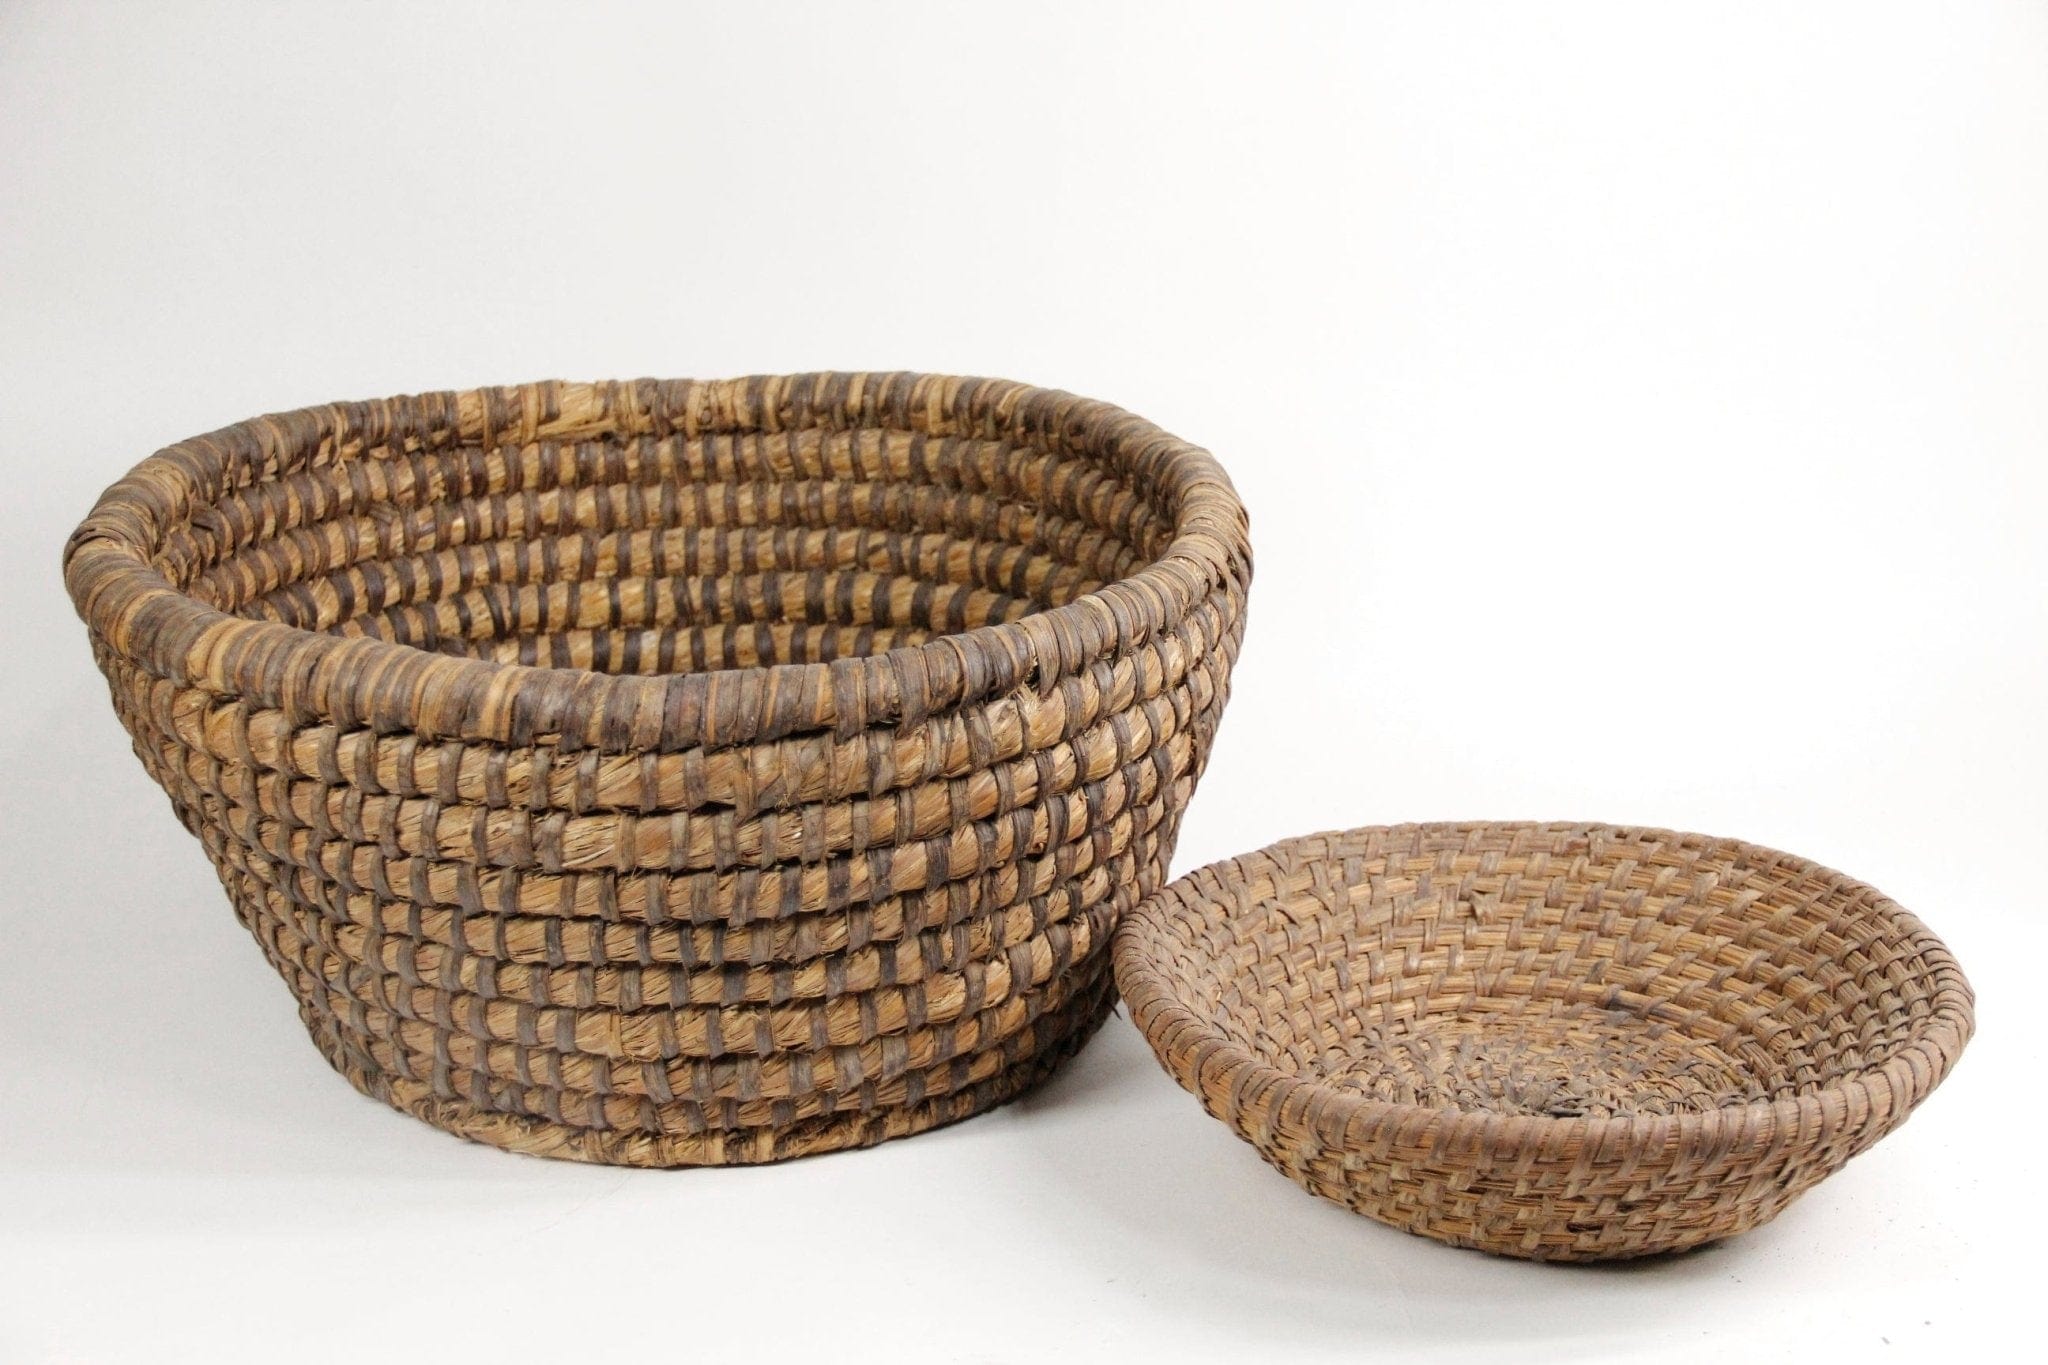 Antique French Basket detail | Hand-Coiled Rye Basket